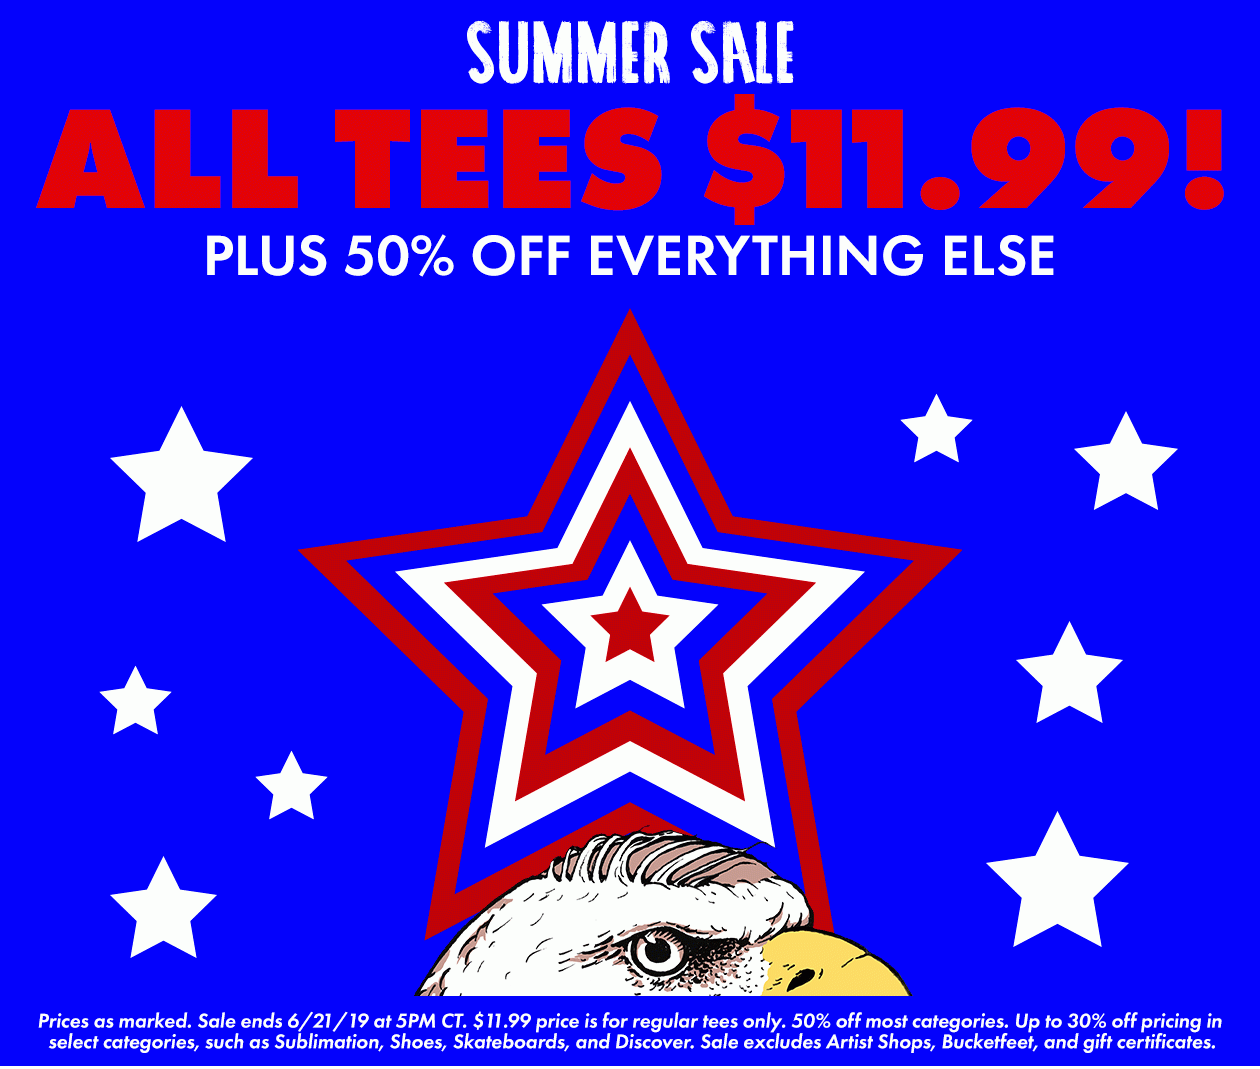 Shop the Summer Sale! $11.99 Tees